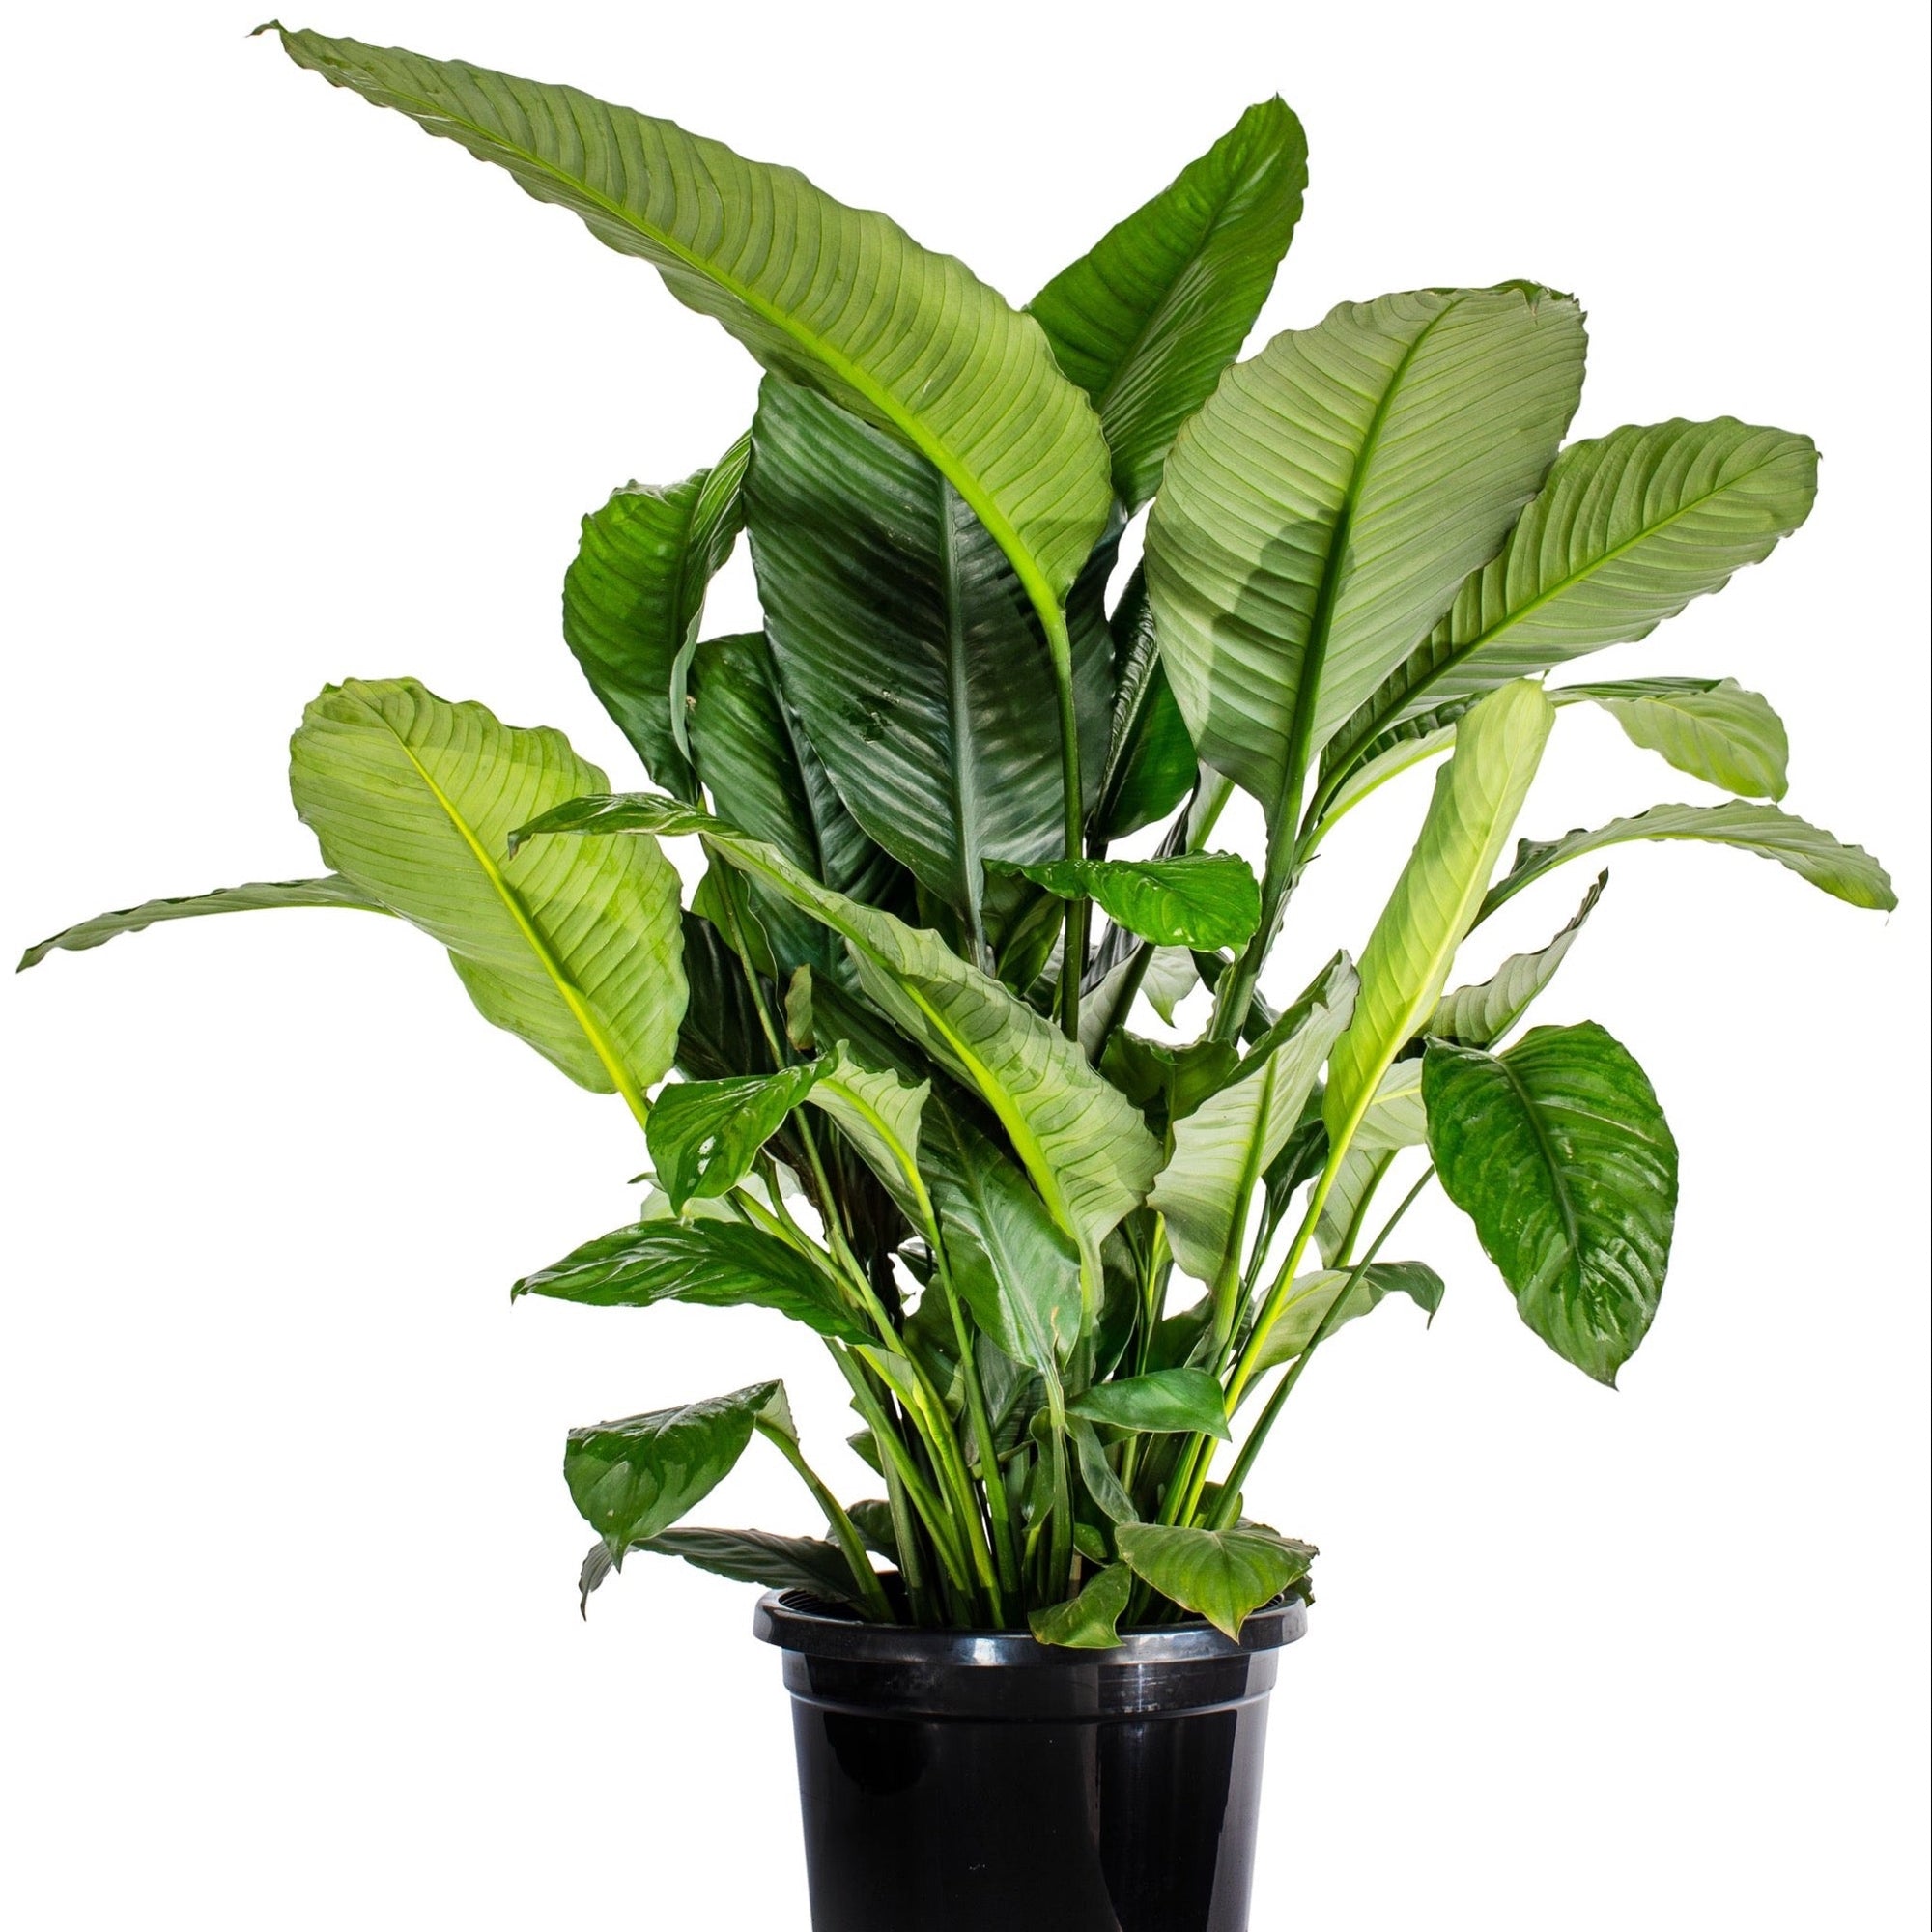 Spathiphyllum Peace Lilly - Sale